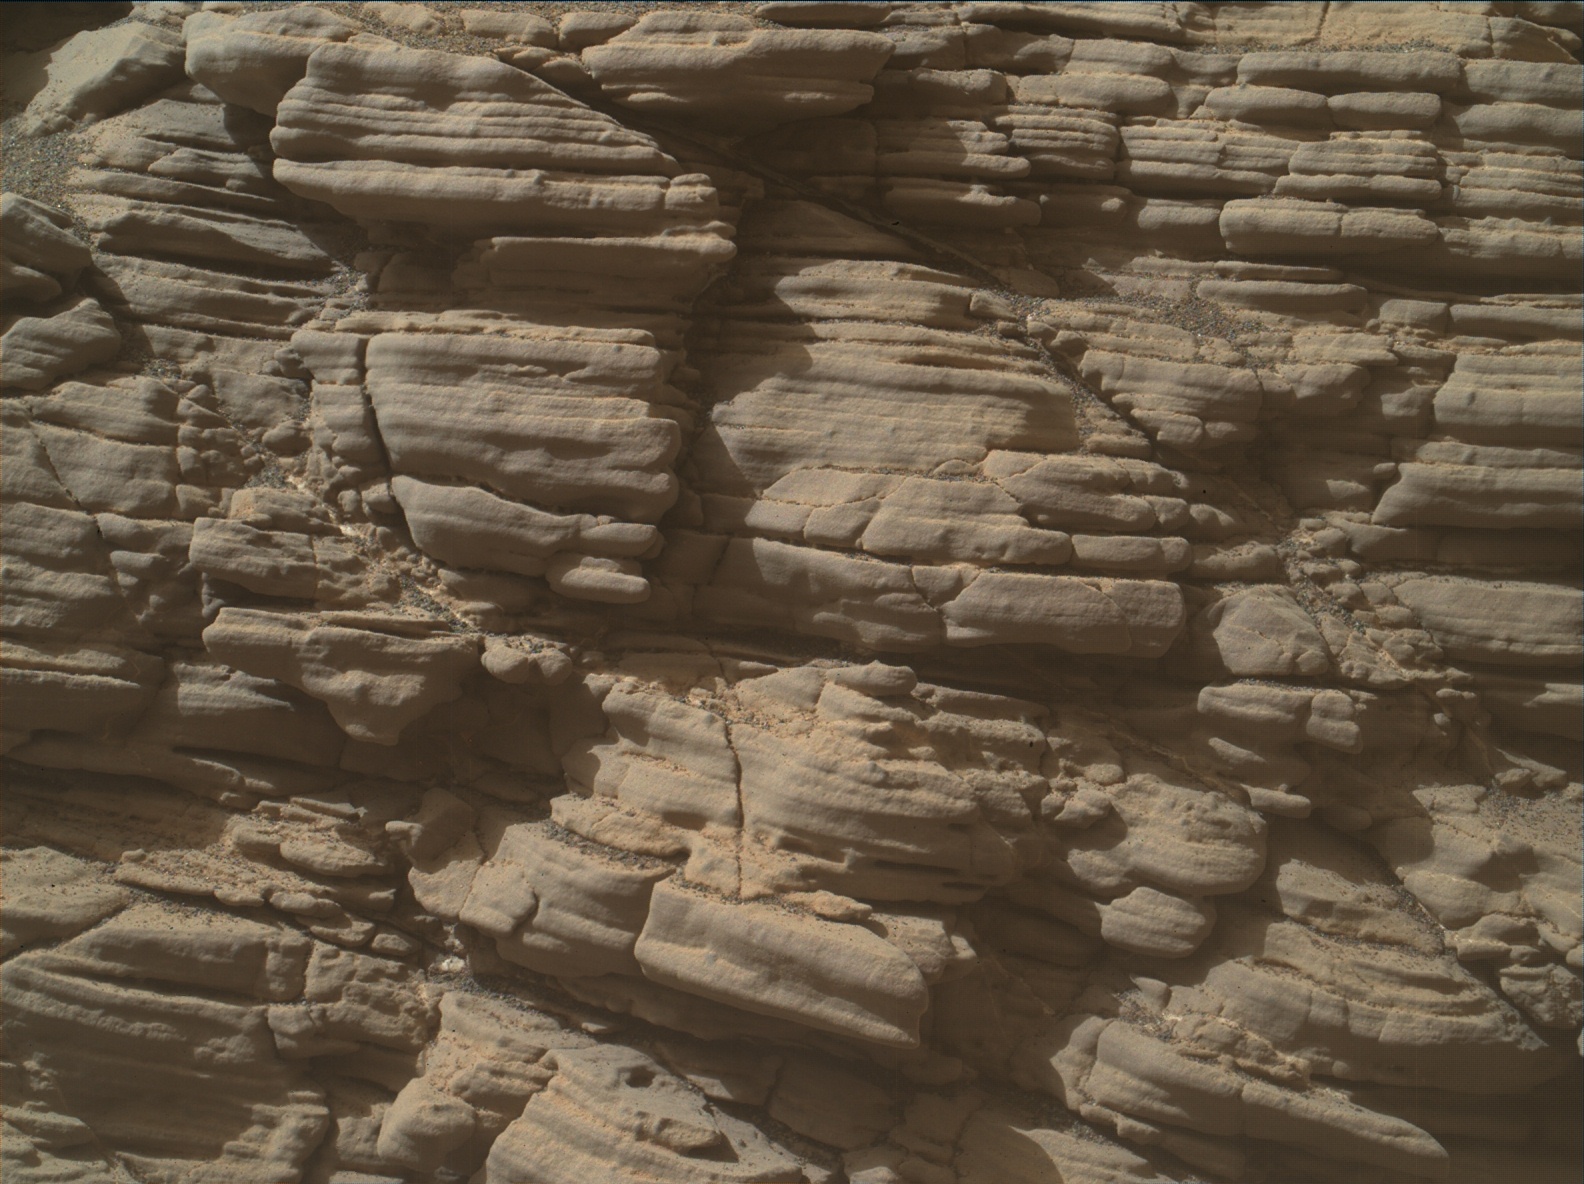 Nasa's Mars rover Curiosity acquired this image using its Mars Hand Lens Imager (MAHLI) on Sol 2929